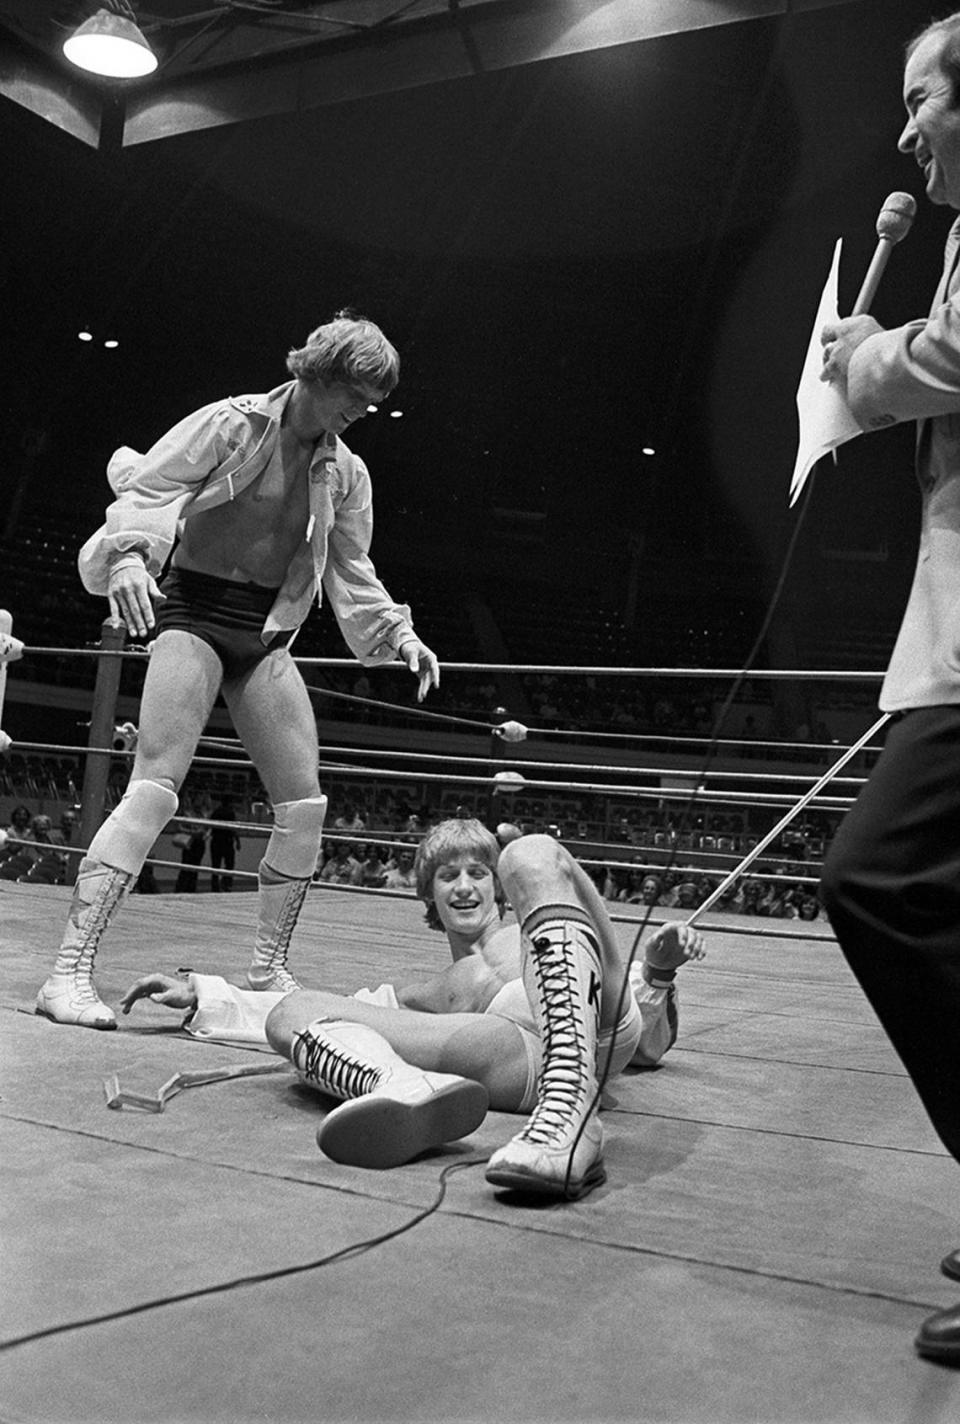 October 9, 1978: Green tights-clad David Von Erich steals the glory from brother Kevin at unique “ribbon slamming” ceremonies at the newly renovated Will Rogers Coliseum, with Miss Texas Sandi Miller and Mayor Hugh Parmer clutching ends of the red crepe paper ribbon. “The grand old lady of Fort Worth” recently completed a $1.2 million facelift, including new seats and new bathrooms, with Fort Worth dignitaries and coliseum patrons viewing the renovation at the gala reopening.